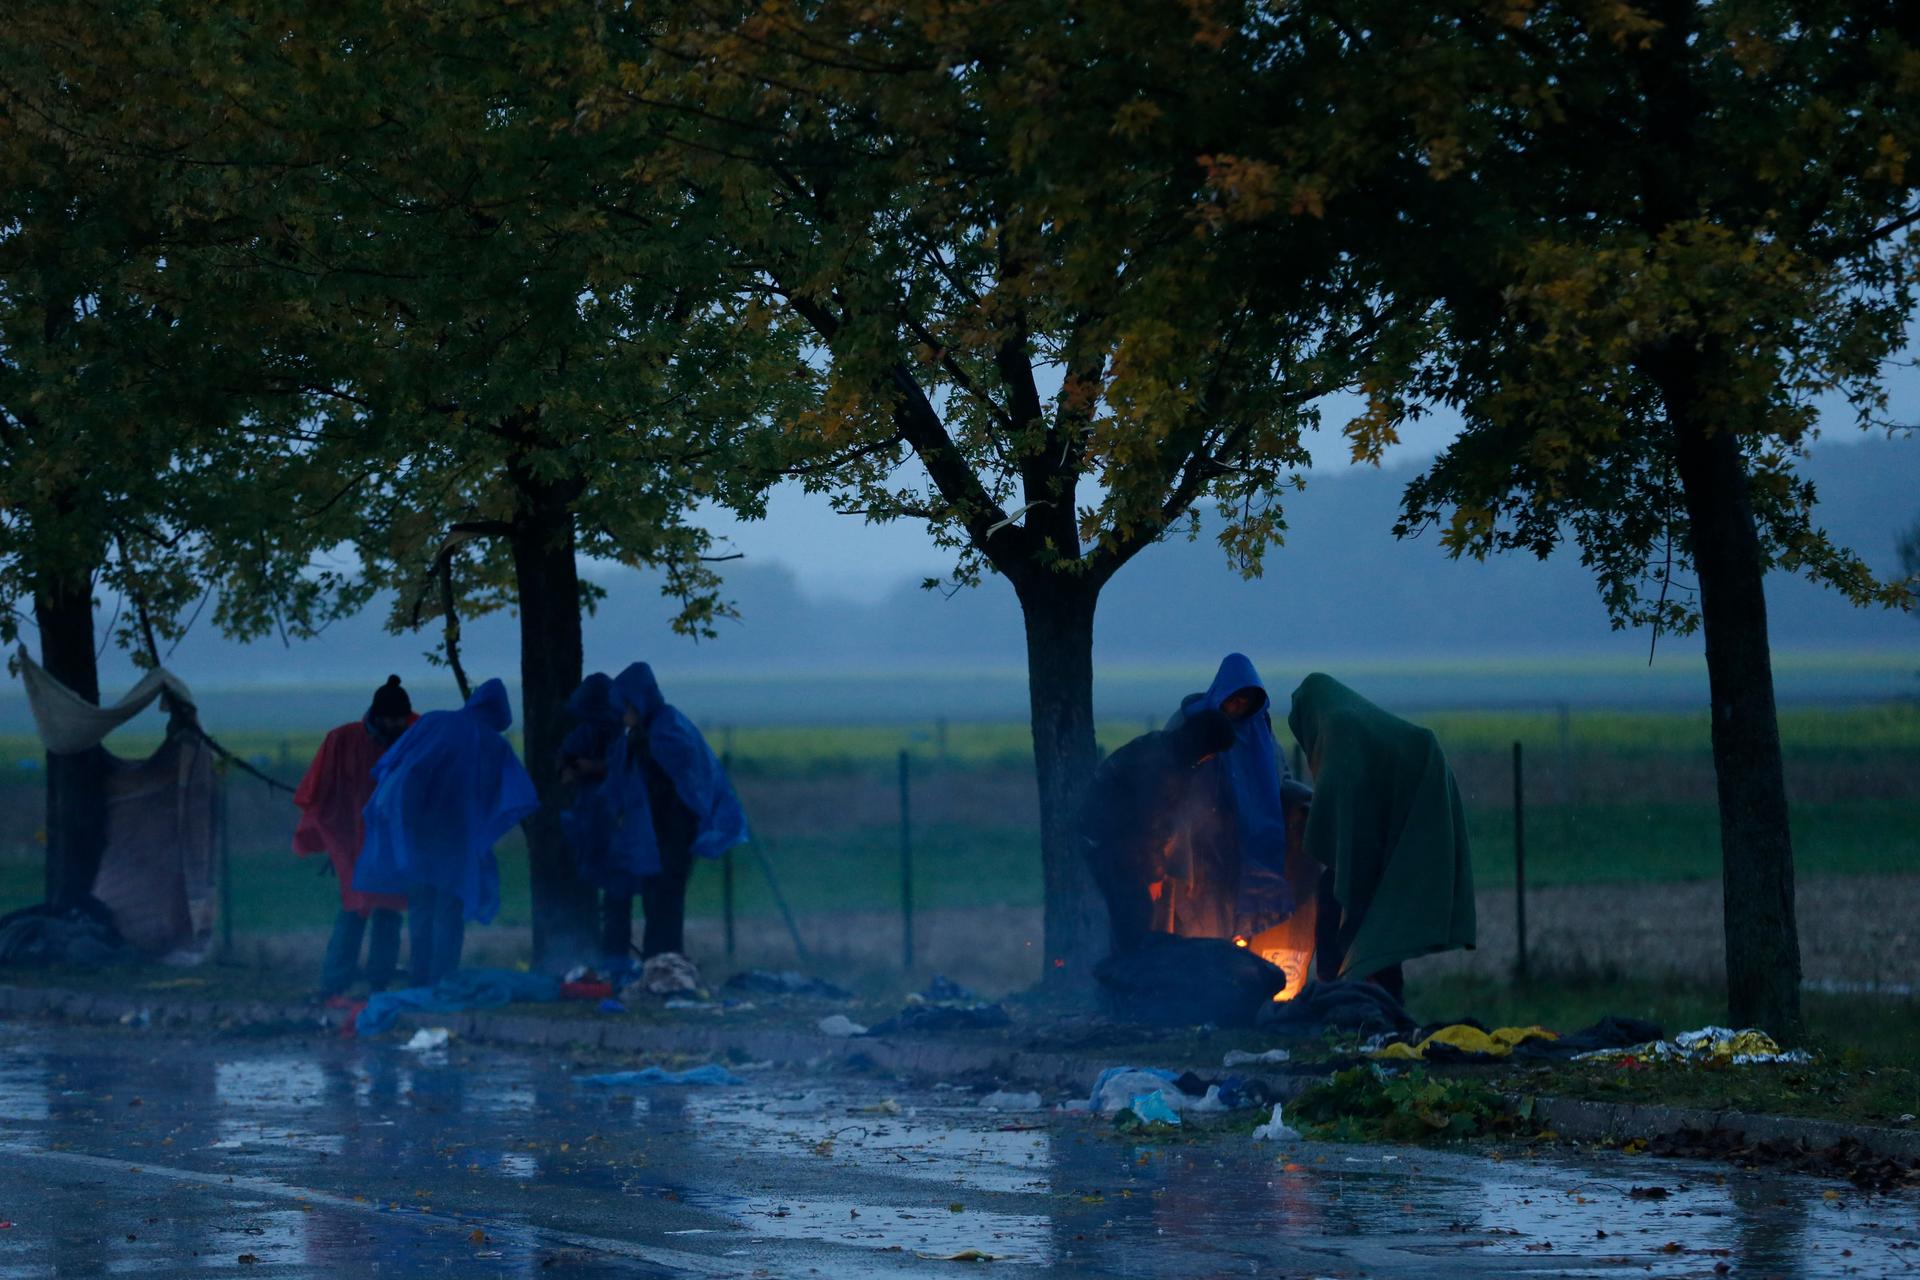 Migrants warm themselves next to a fire as they wait to cross the border from Croatia into Slovenia.